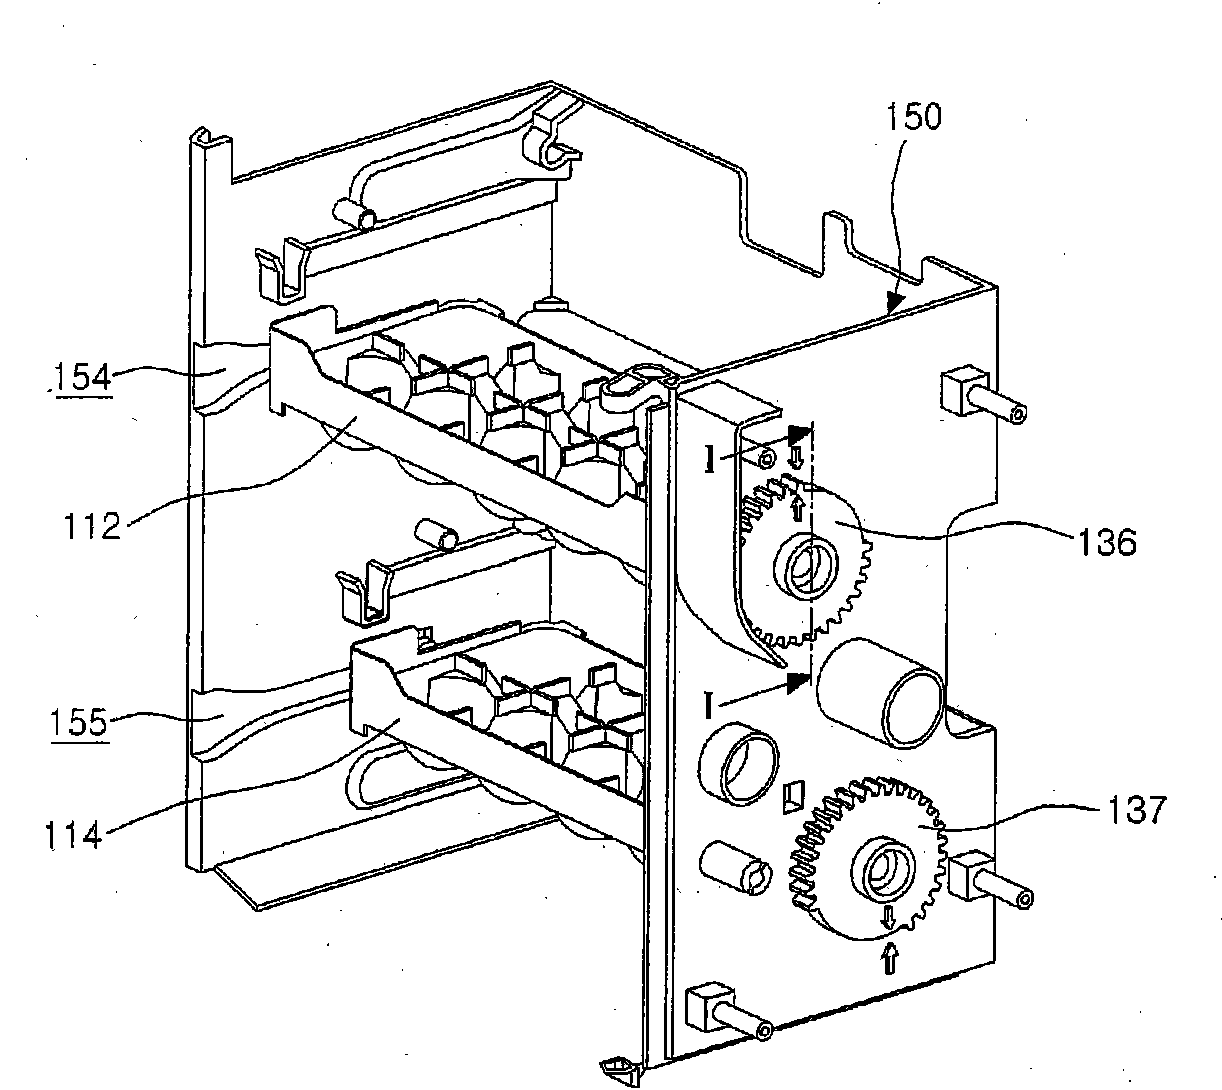 Ice-making assembly of refrigerator